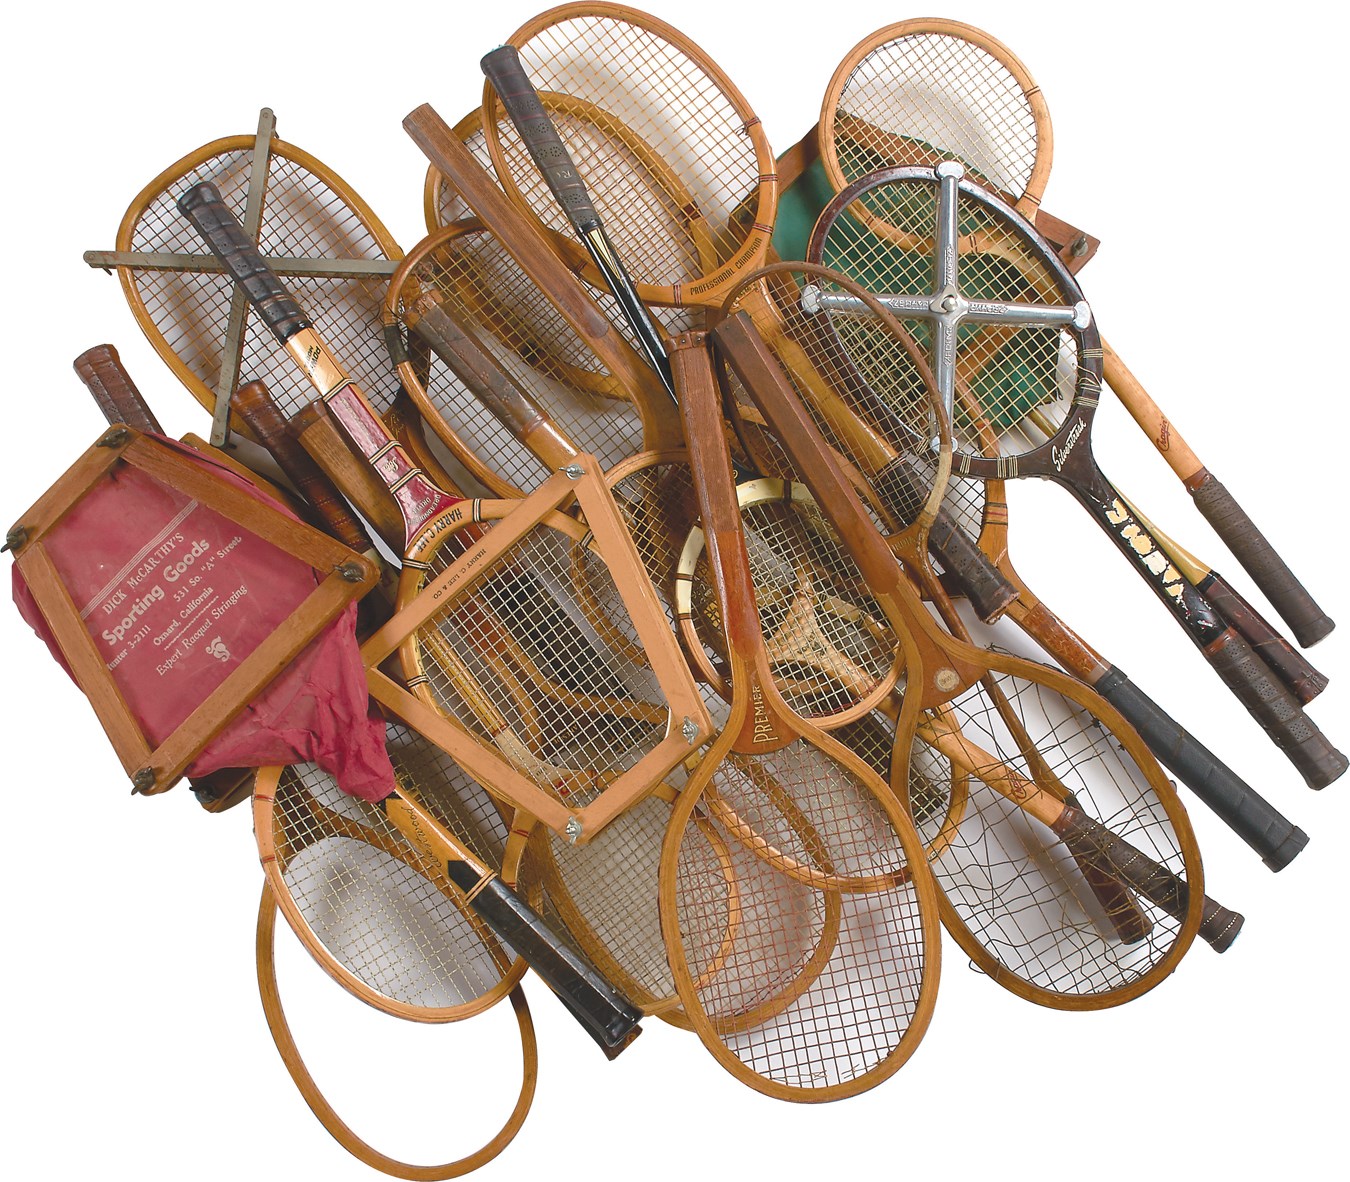 Antique Sporting Goods - Fine Early Tennis Racquet Collection (100+)